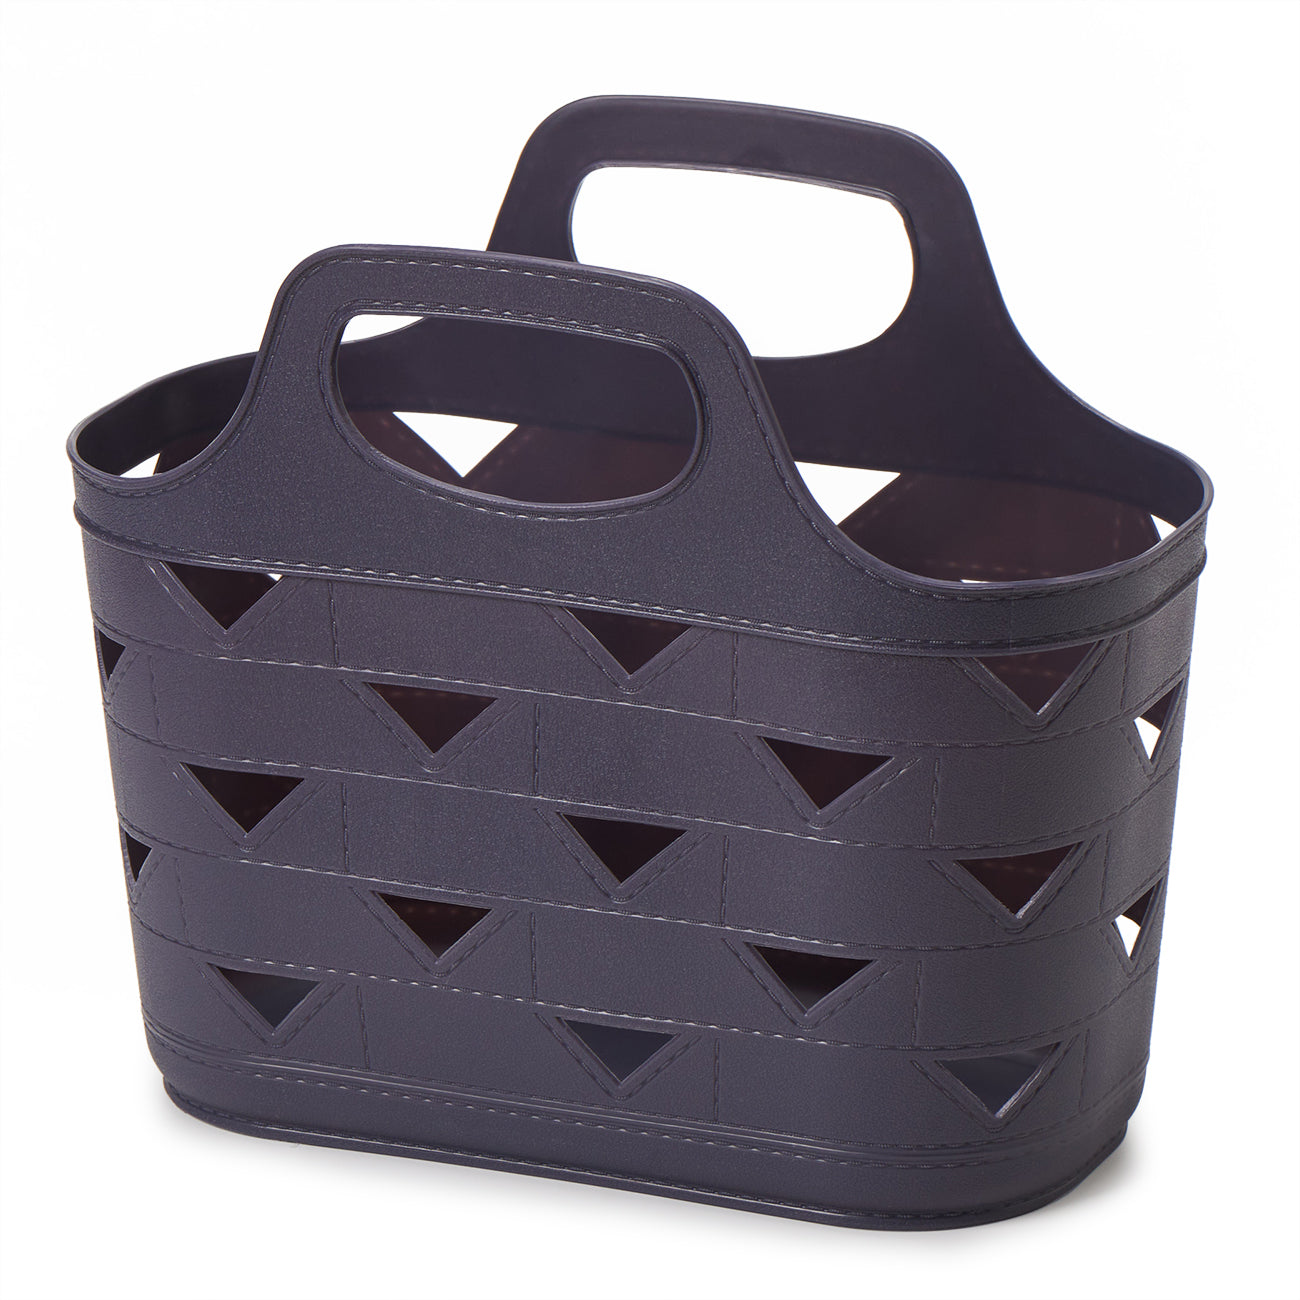 Portable Storage Basket Cleaning Caddy Storage Organizer Tote with